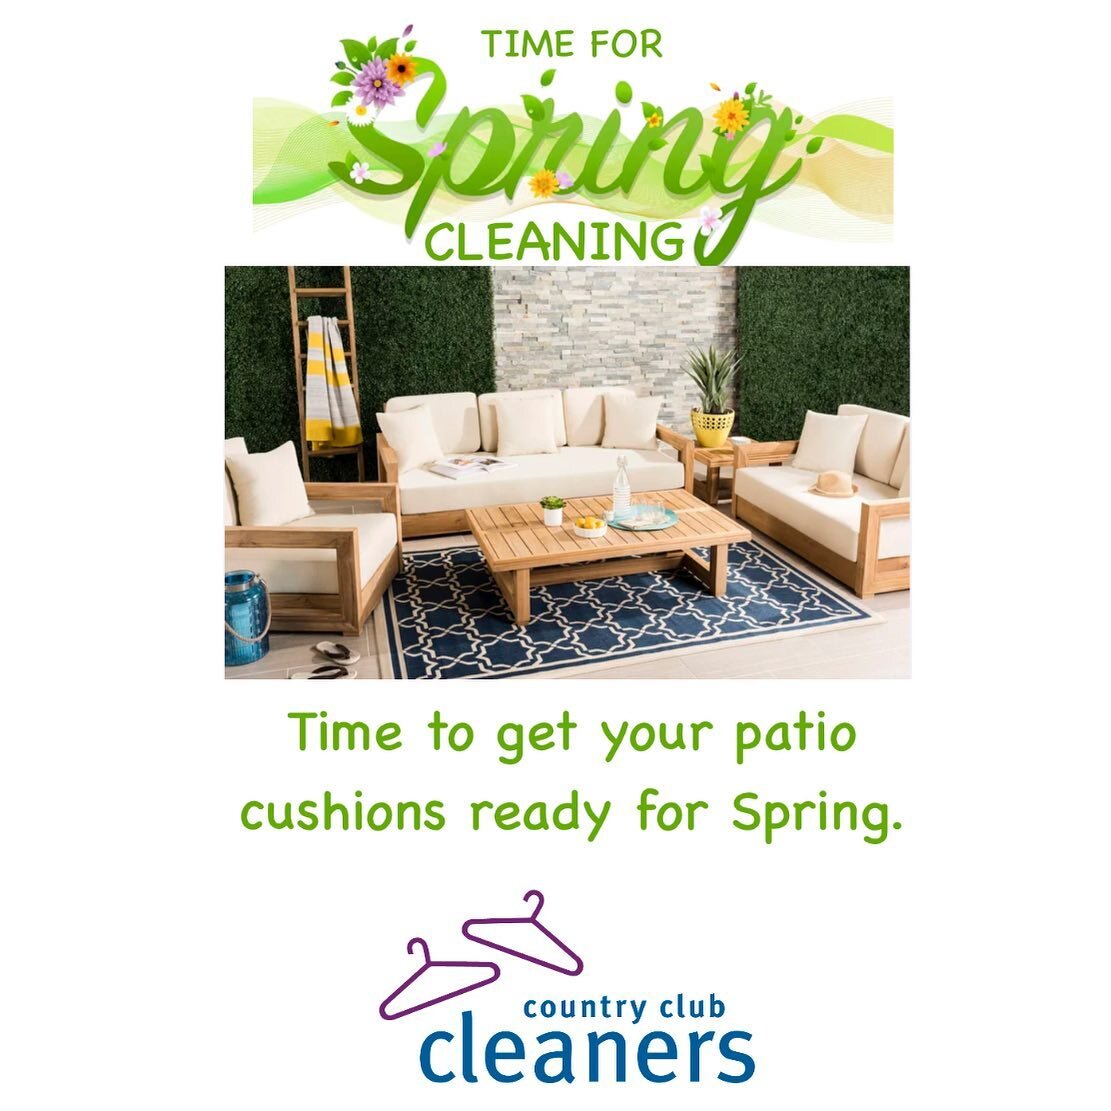 Time to get your patio cushions cleaned! Country Club Cleaners provides free pick up and delivery of your patio cushions and all of your spring cleaning needs.  We will clean your patio cushions by hand and get them back to looking brand new just in 